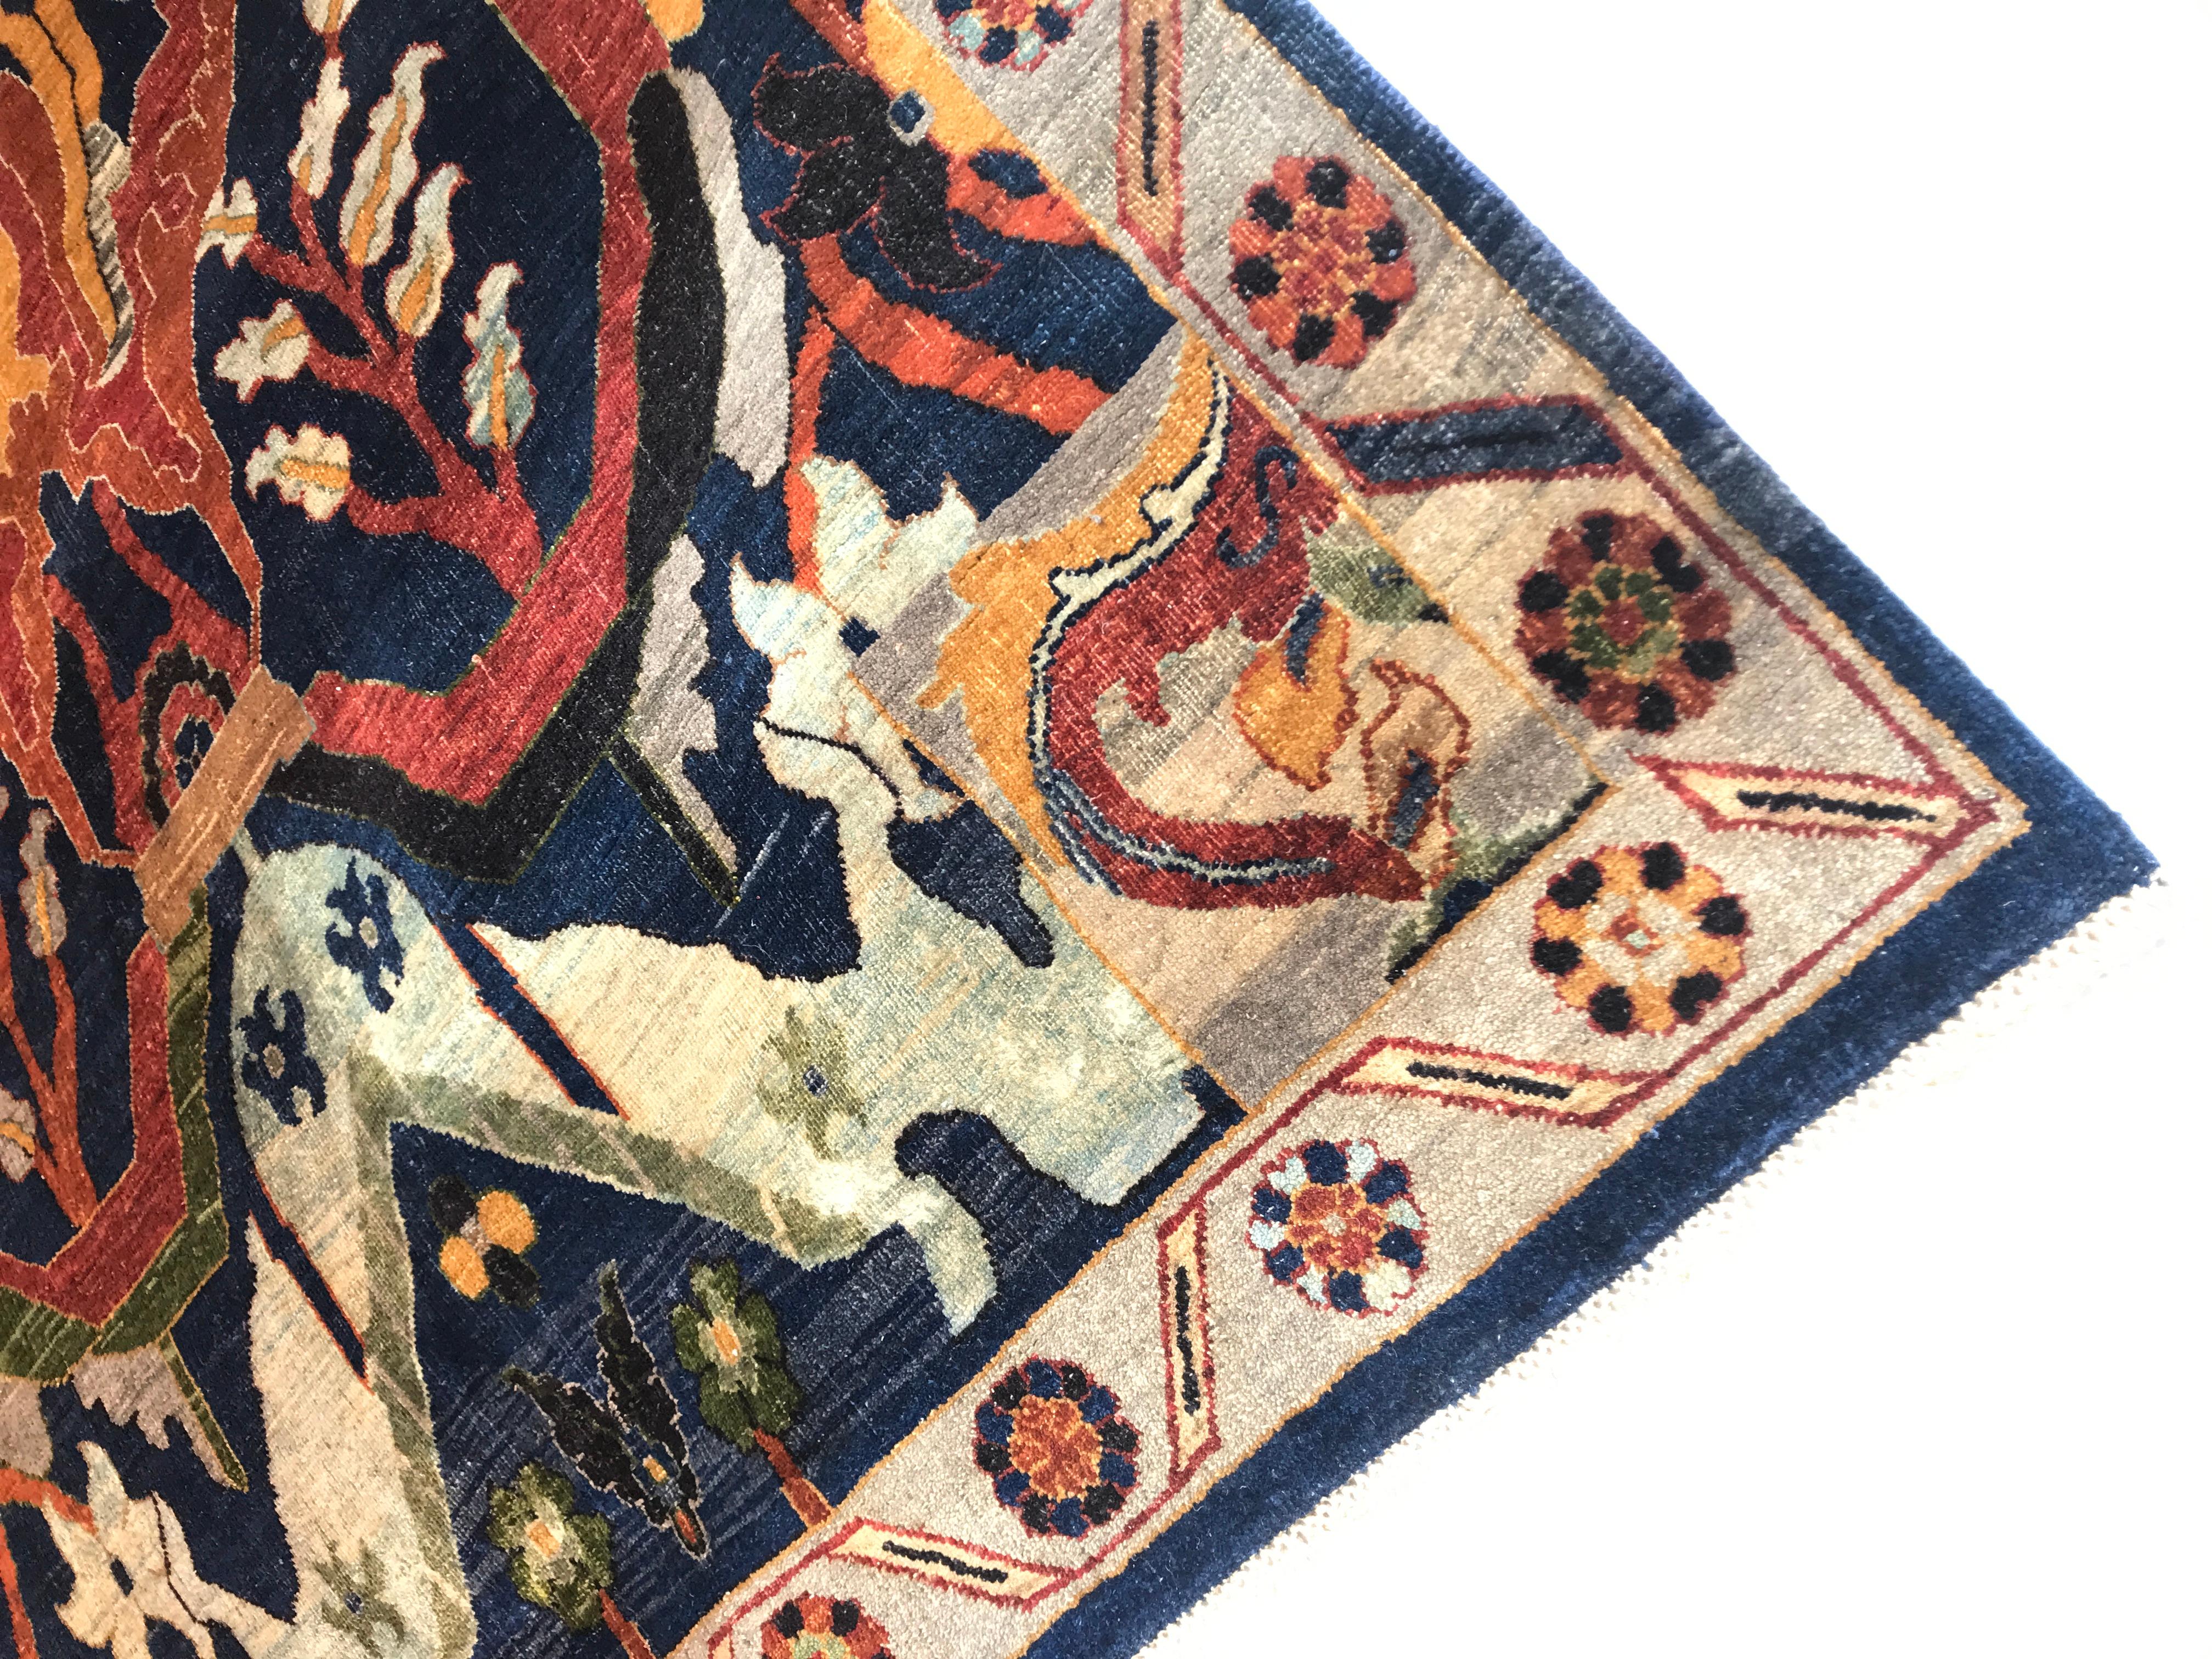 This one-of-a-kind vegetable dyed rug was handknotted in India in 2022. The weaving house utilizes closed-loop grey water recycling and commits to environmentally conscious practices. Designed with abstracted Arts & Crafts motifs in saturated